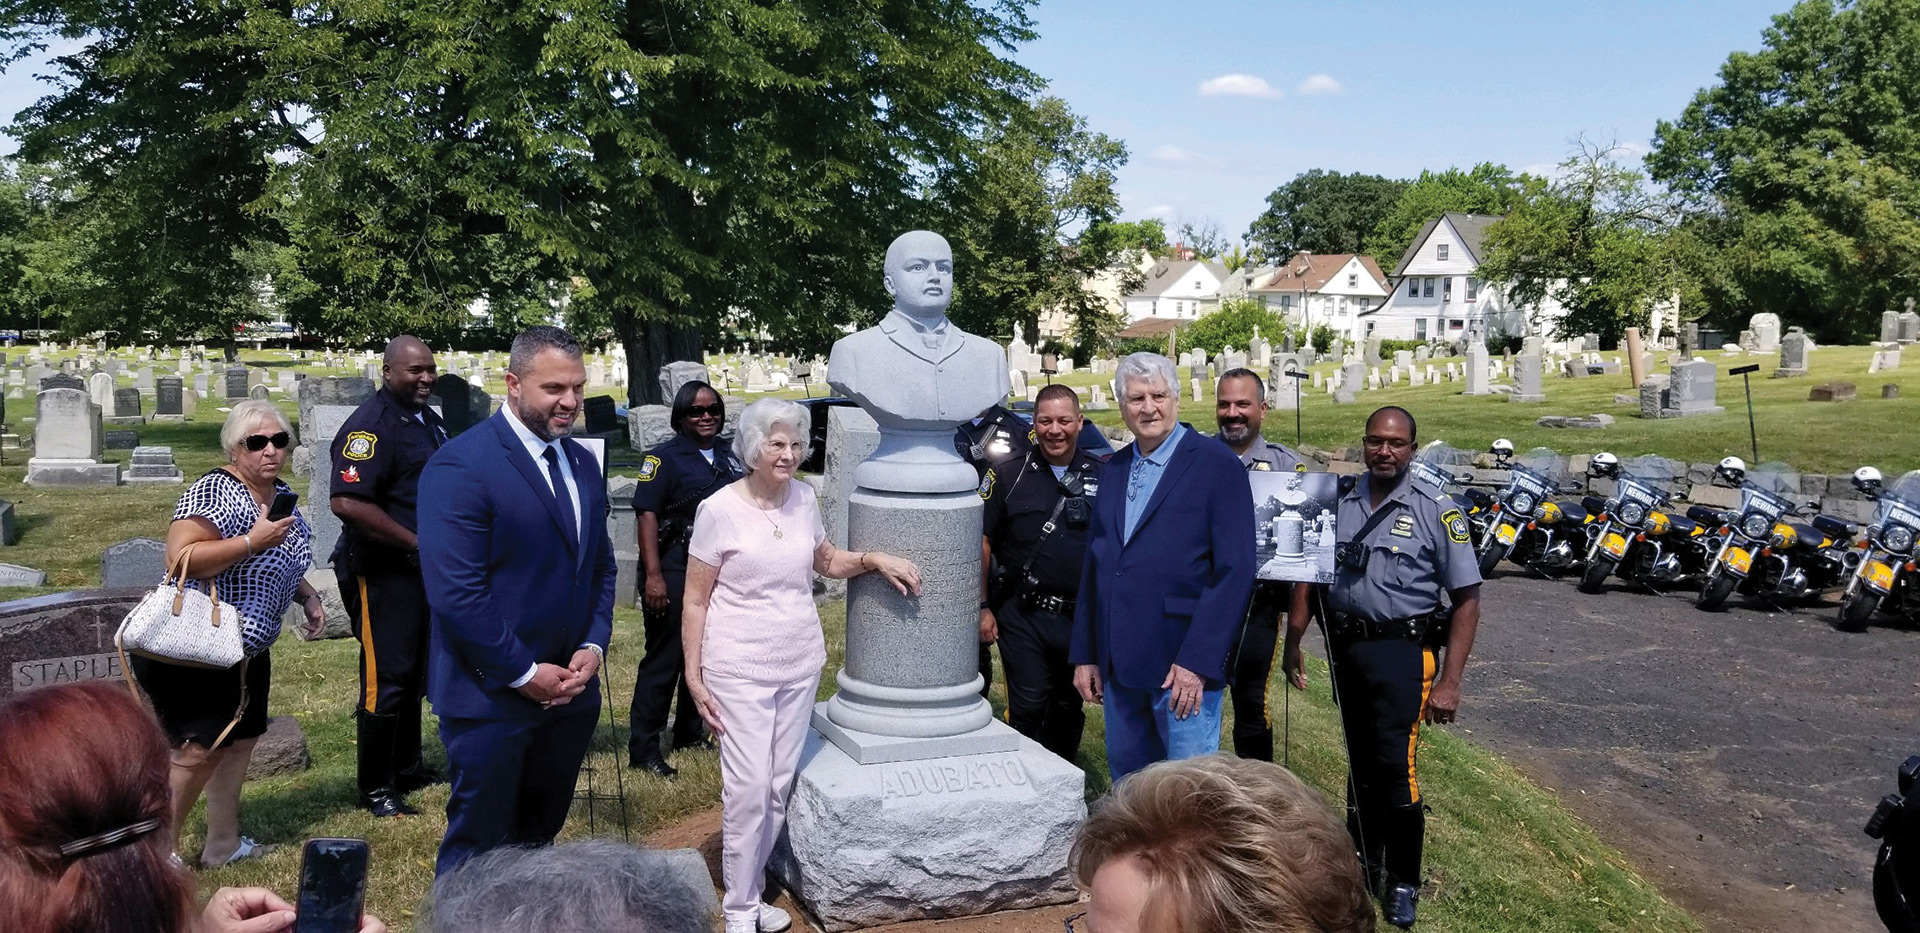 detective-thomas-adubato-honored-by-newark-fop-103-years-after-his-death-1